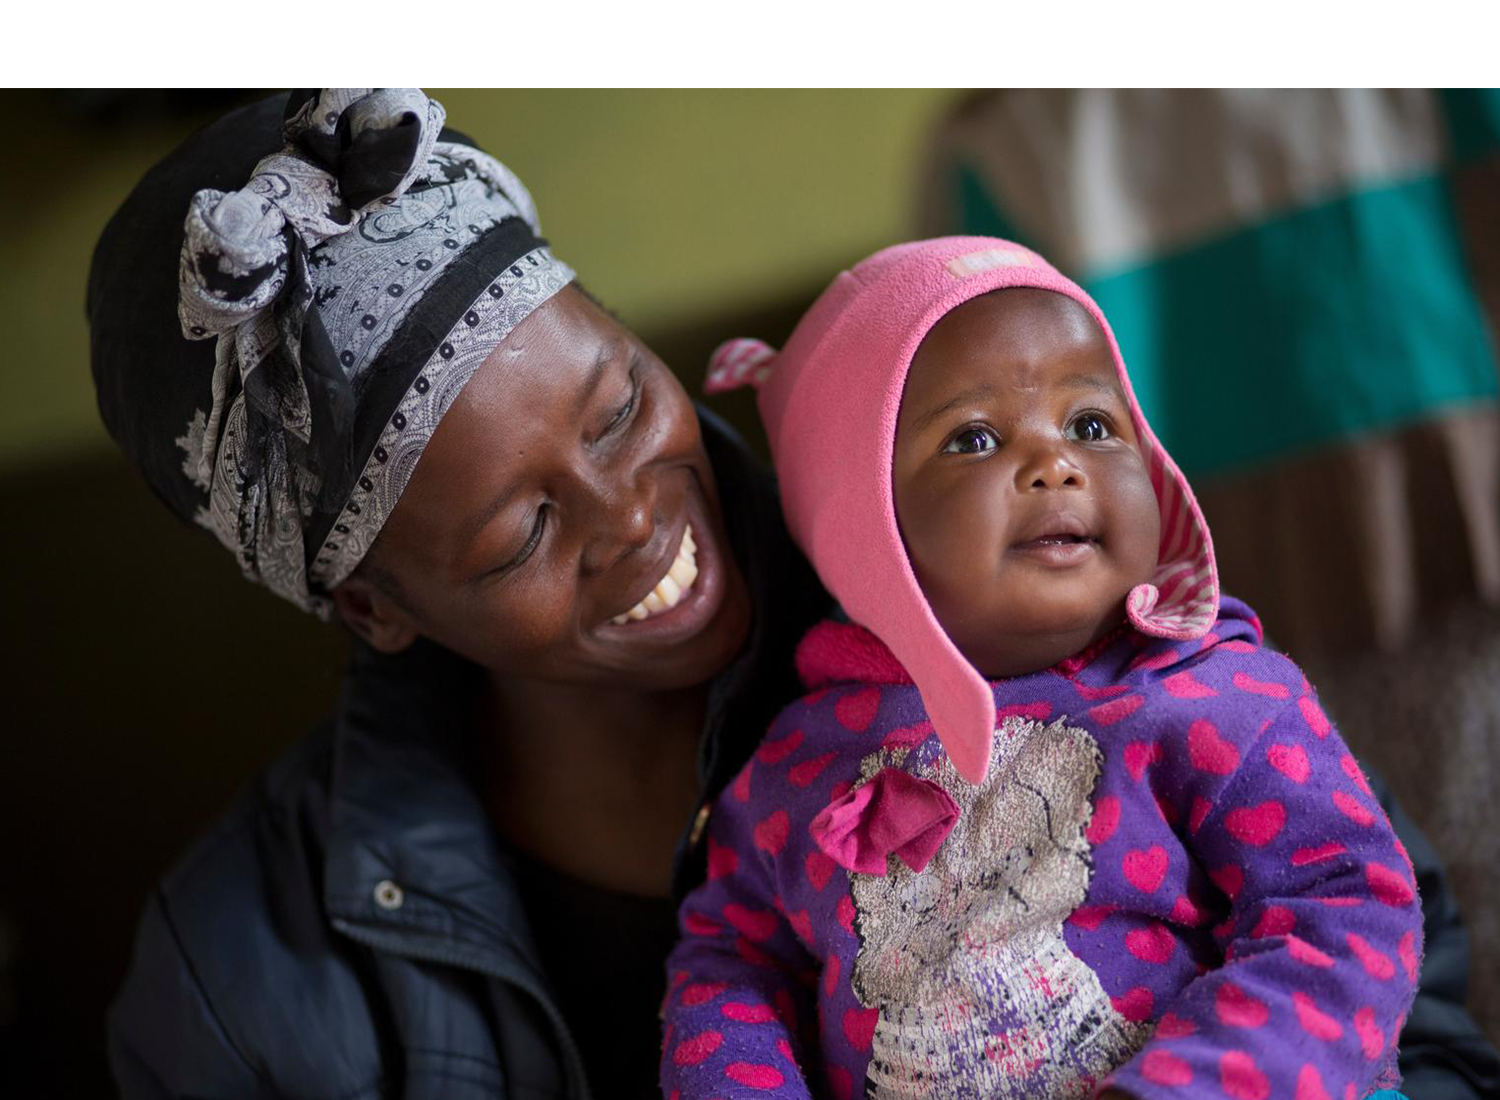 Lundiwe tested negative, to the joy of her mother